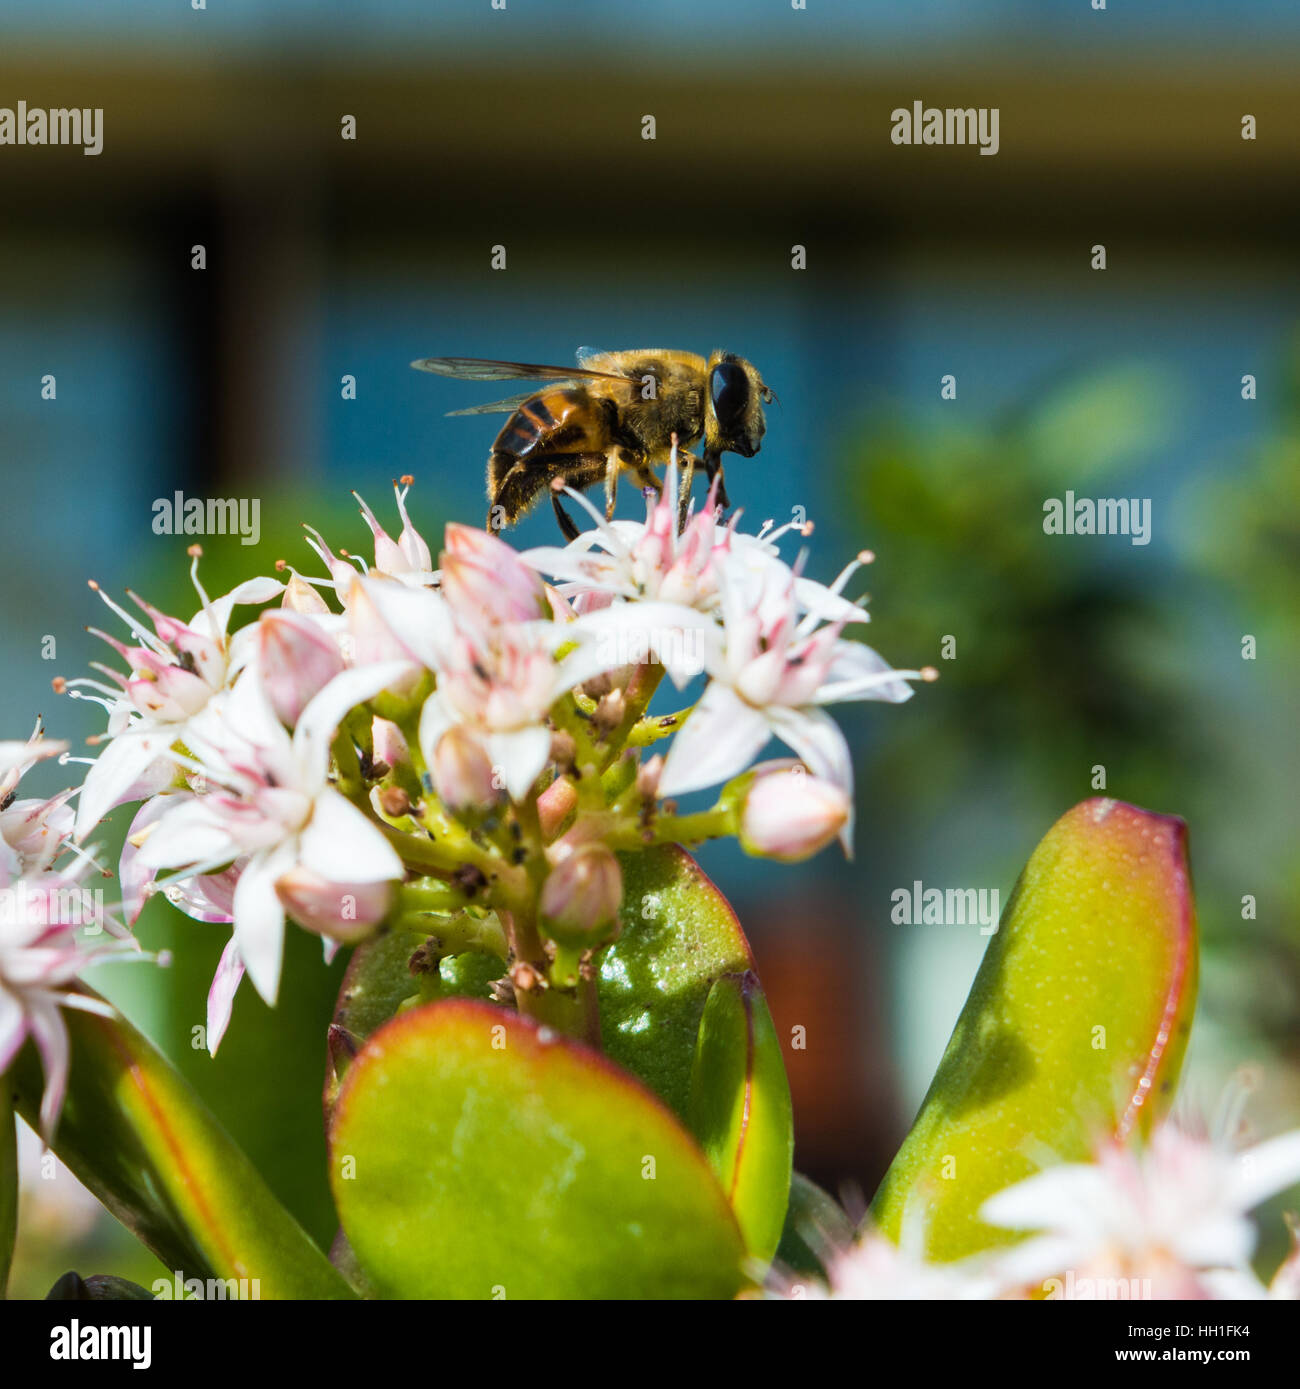 Honeybee Collecting Pollen From a Jade Plant Stock Photo